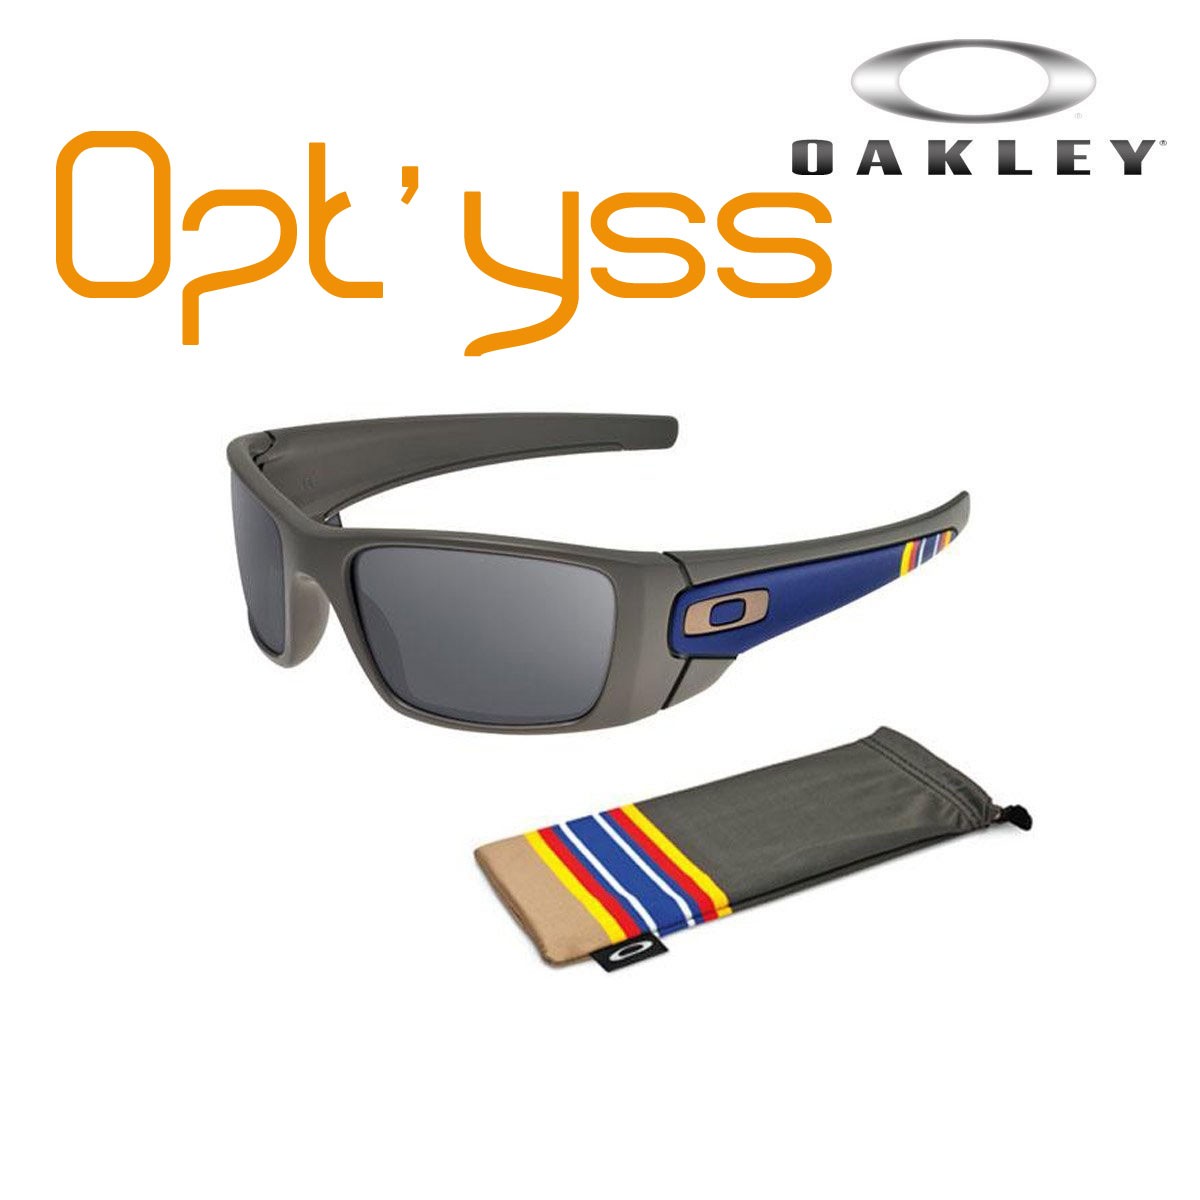 oakley SI Fuel Cell GWOT - Opt'yss instruments